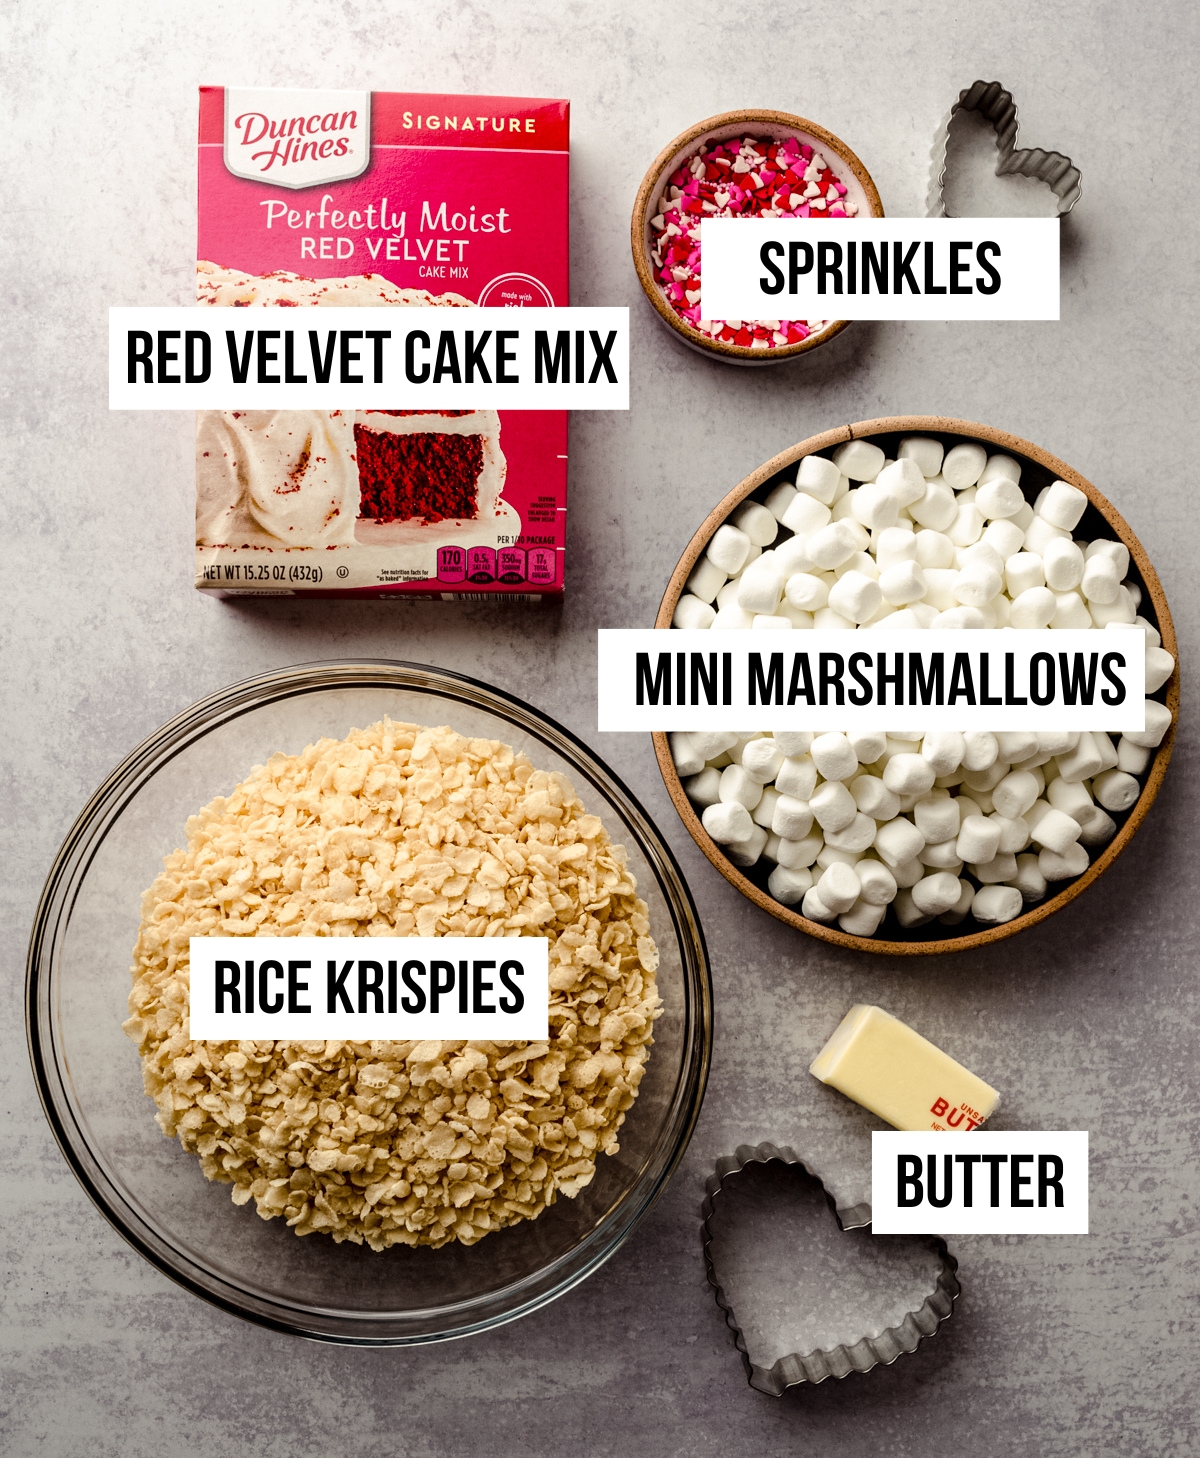 Aerial photo of ingredients for red velvet Rice Krispies treats with text overlay.